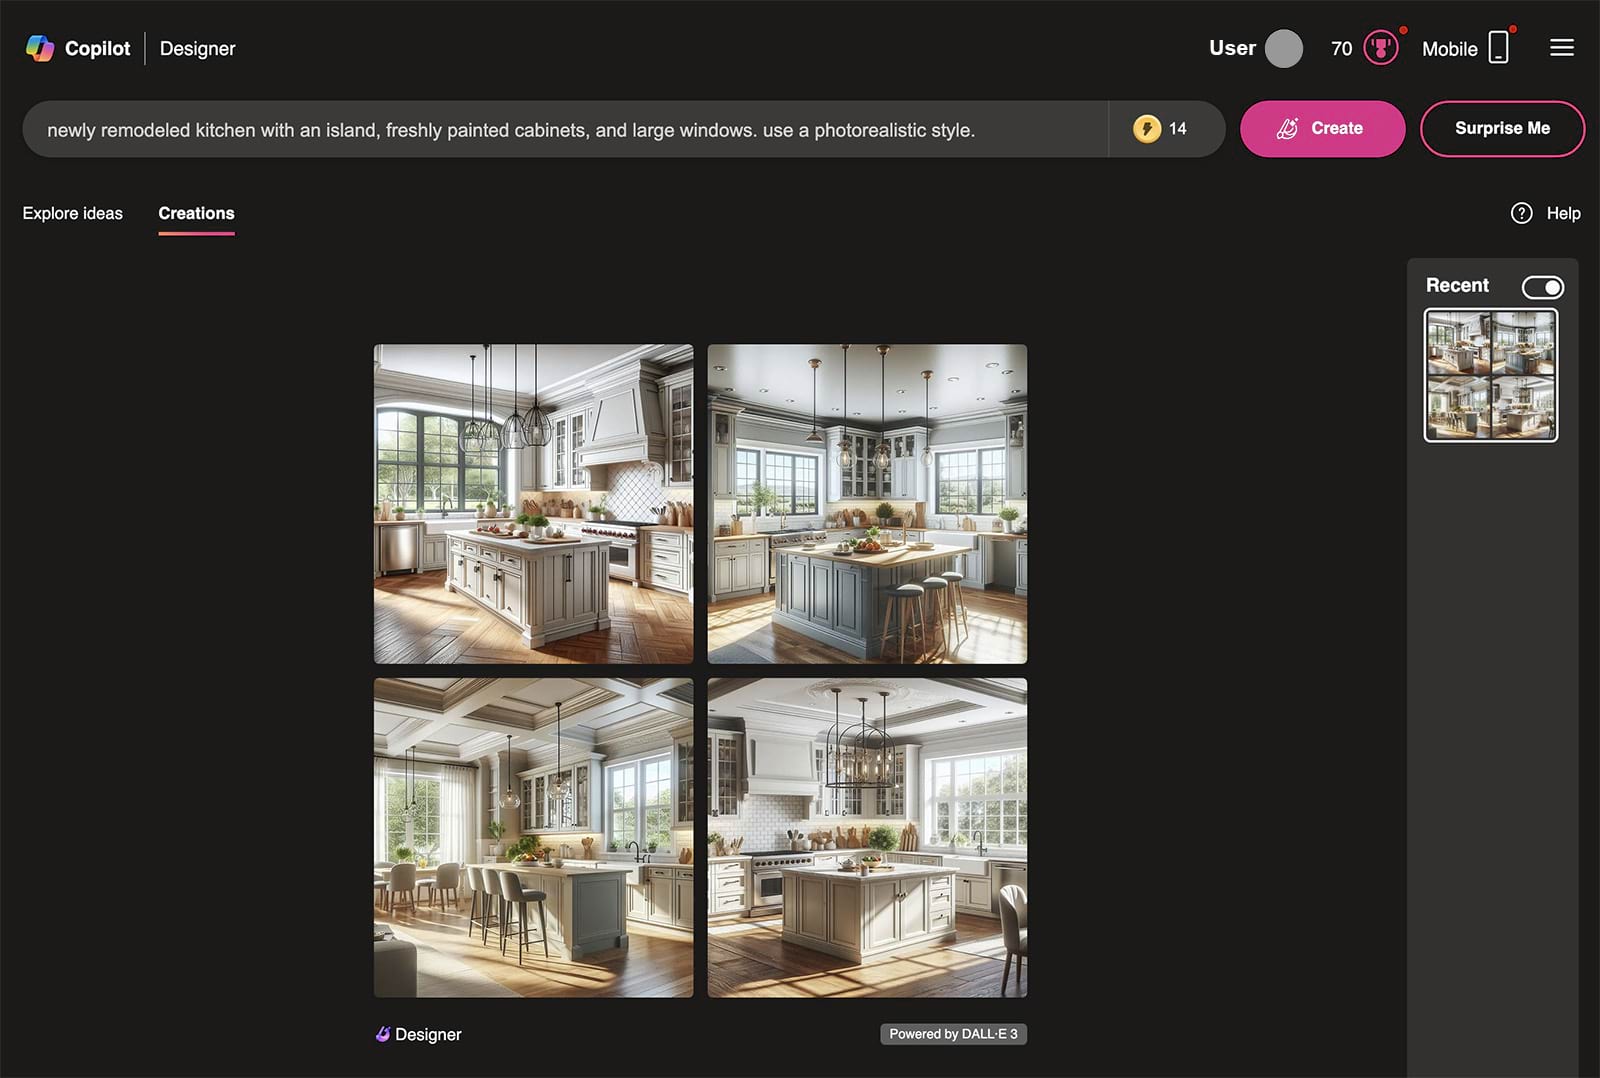 Microsoft Designer's Image Creator showing images generated of remodeled kitchens.